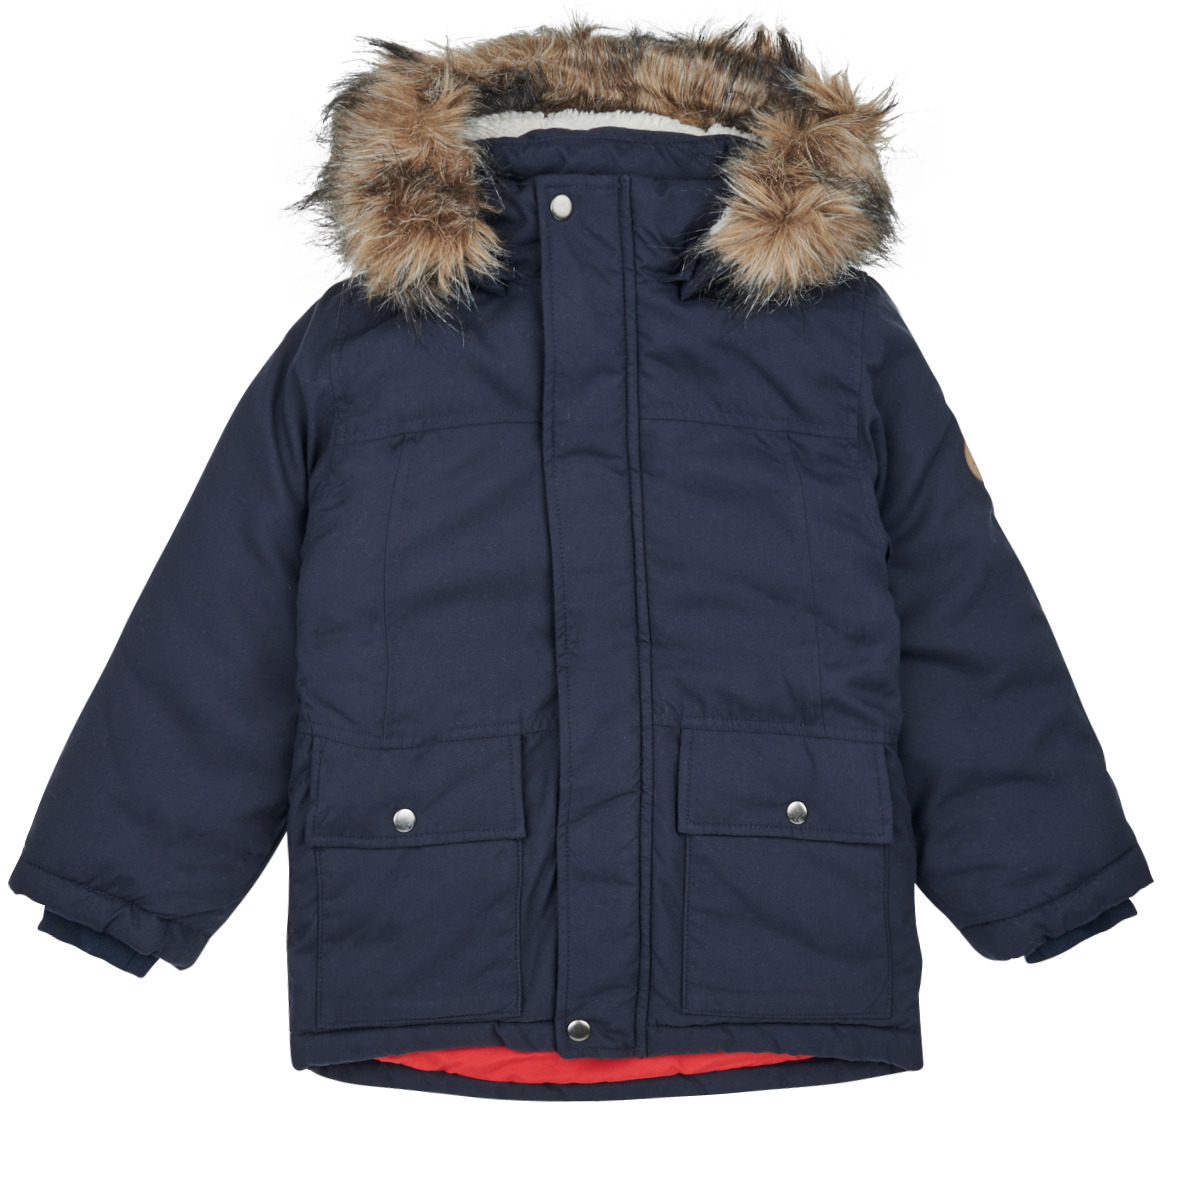 Parkas Spartoo Name - Free it - PARKA Child ! NET Marine PB | Clothing delivery JACKET NKMMARLIN SOUTH